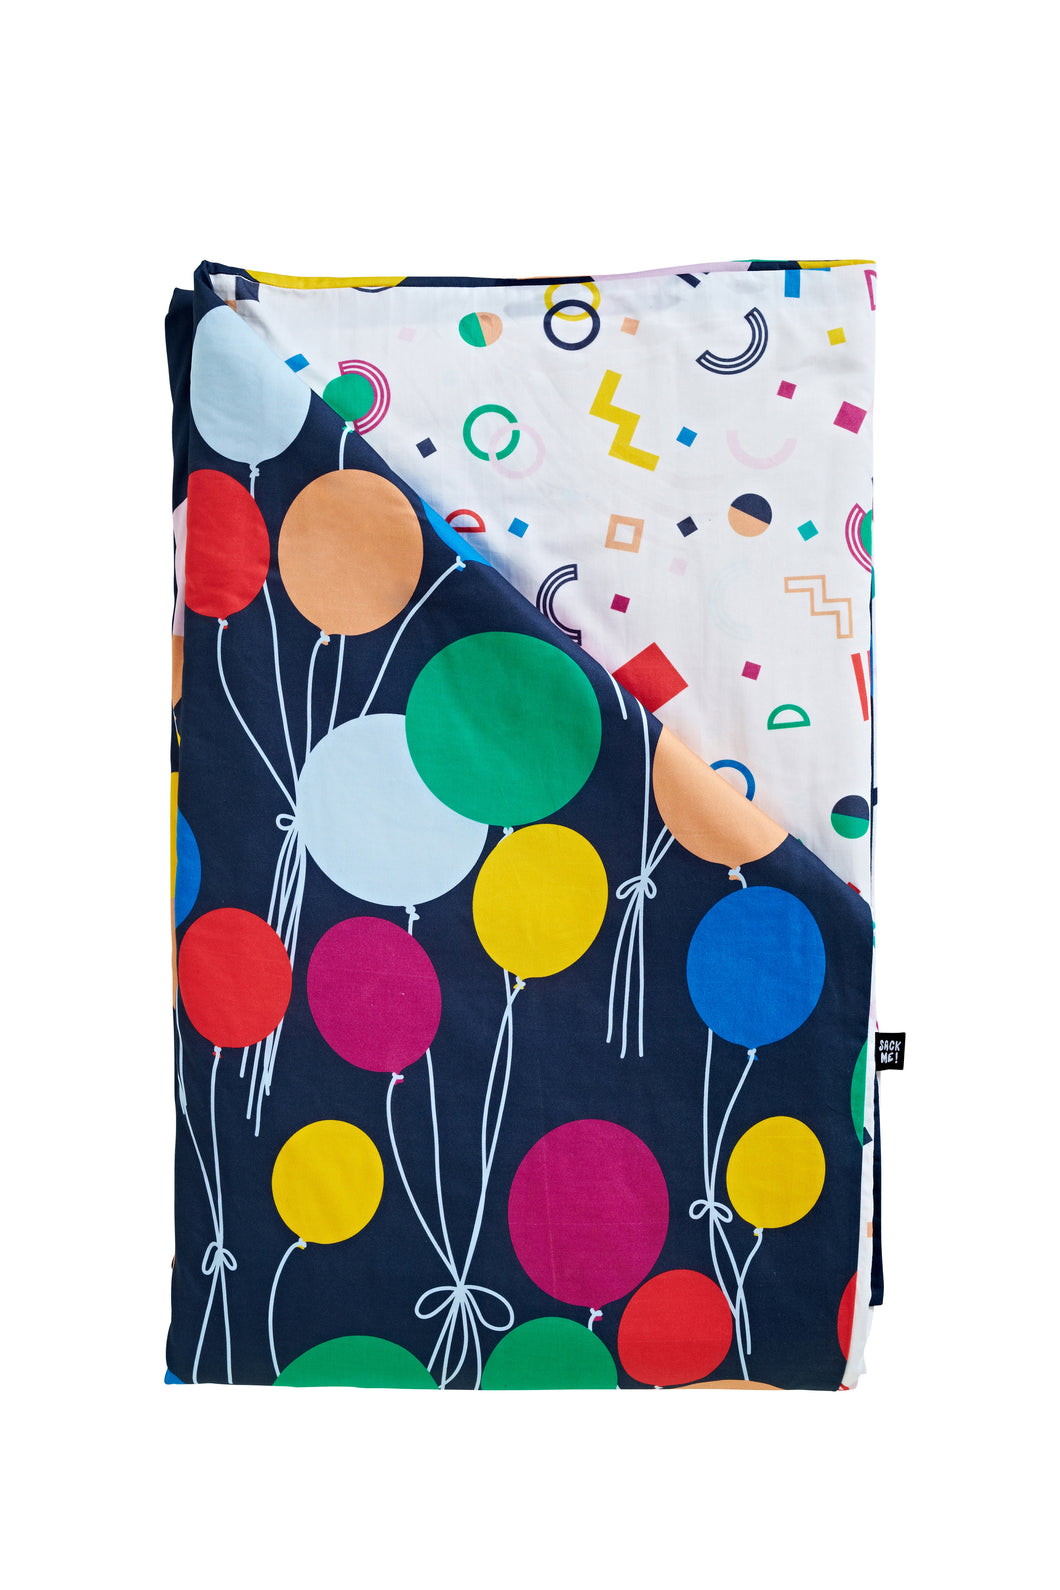 Up Up and Away! Reversible Kids Doona Cover, Double - Sack Me!